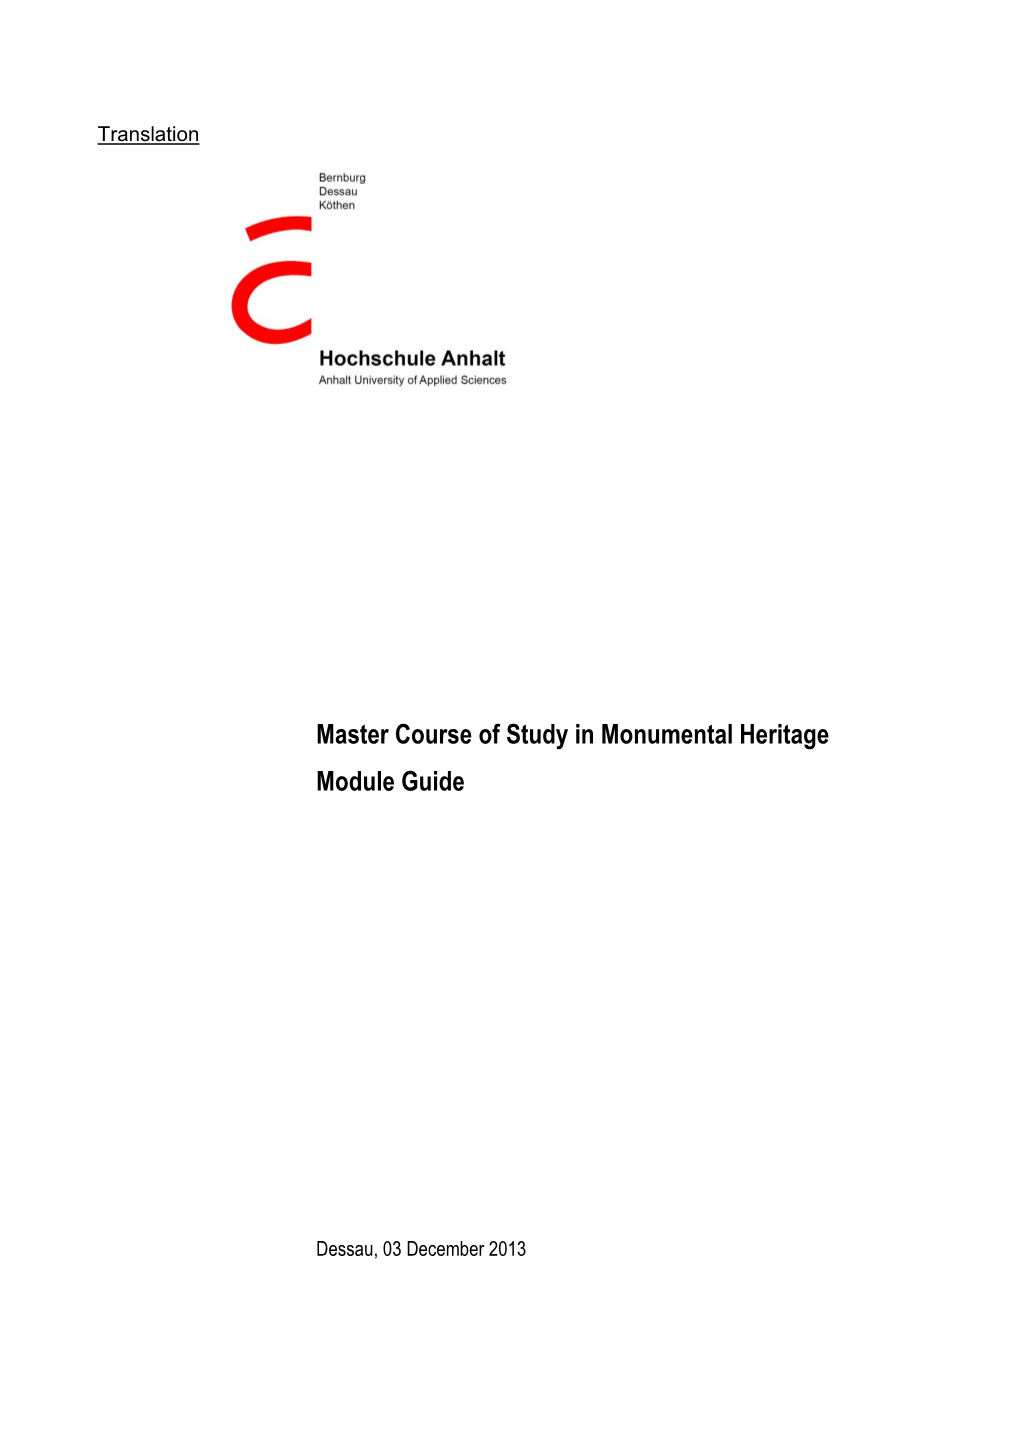 Master Course of Study in Monumental Heritage Module Guide